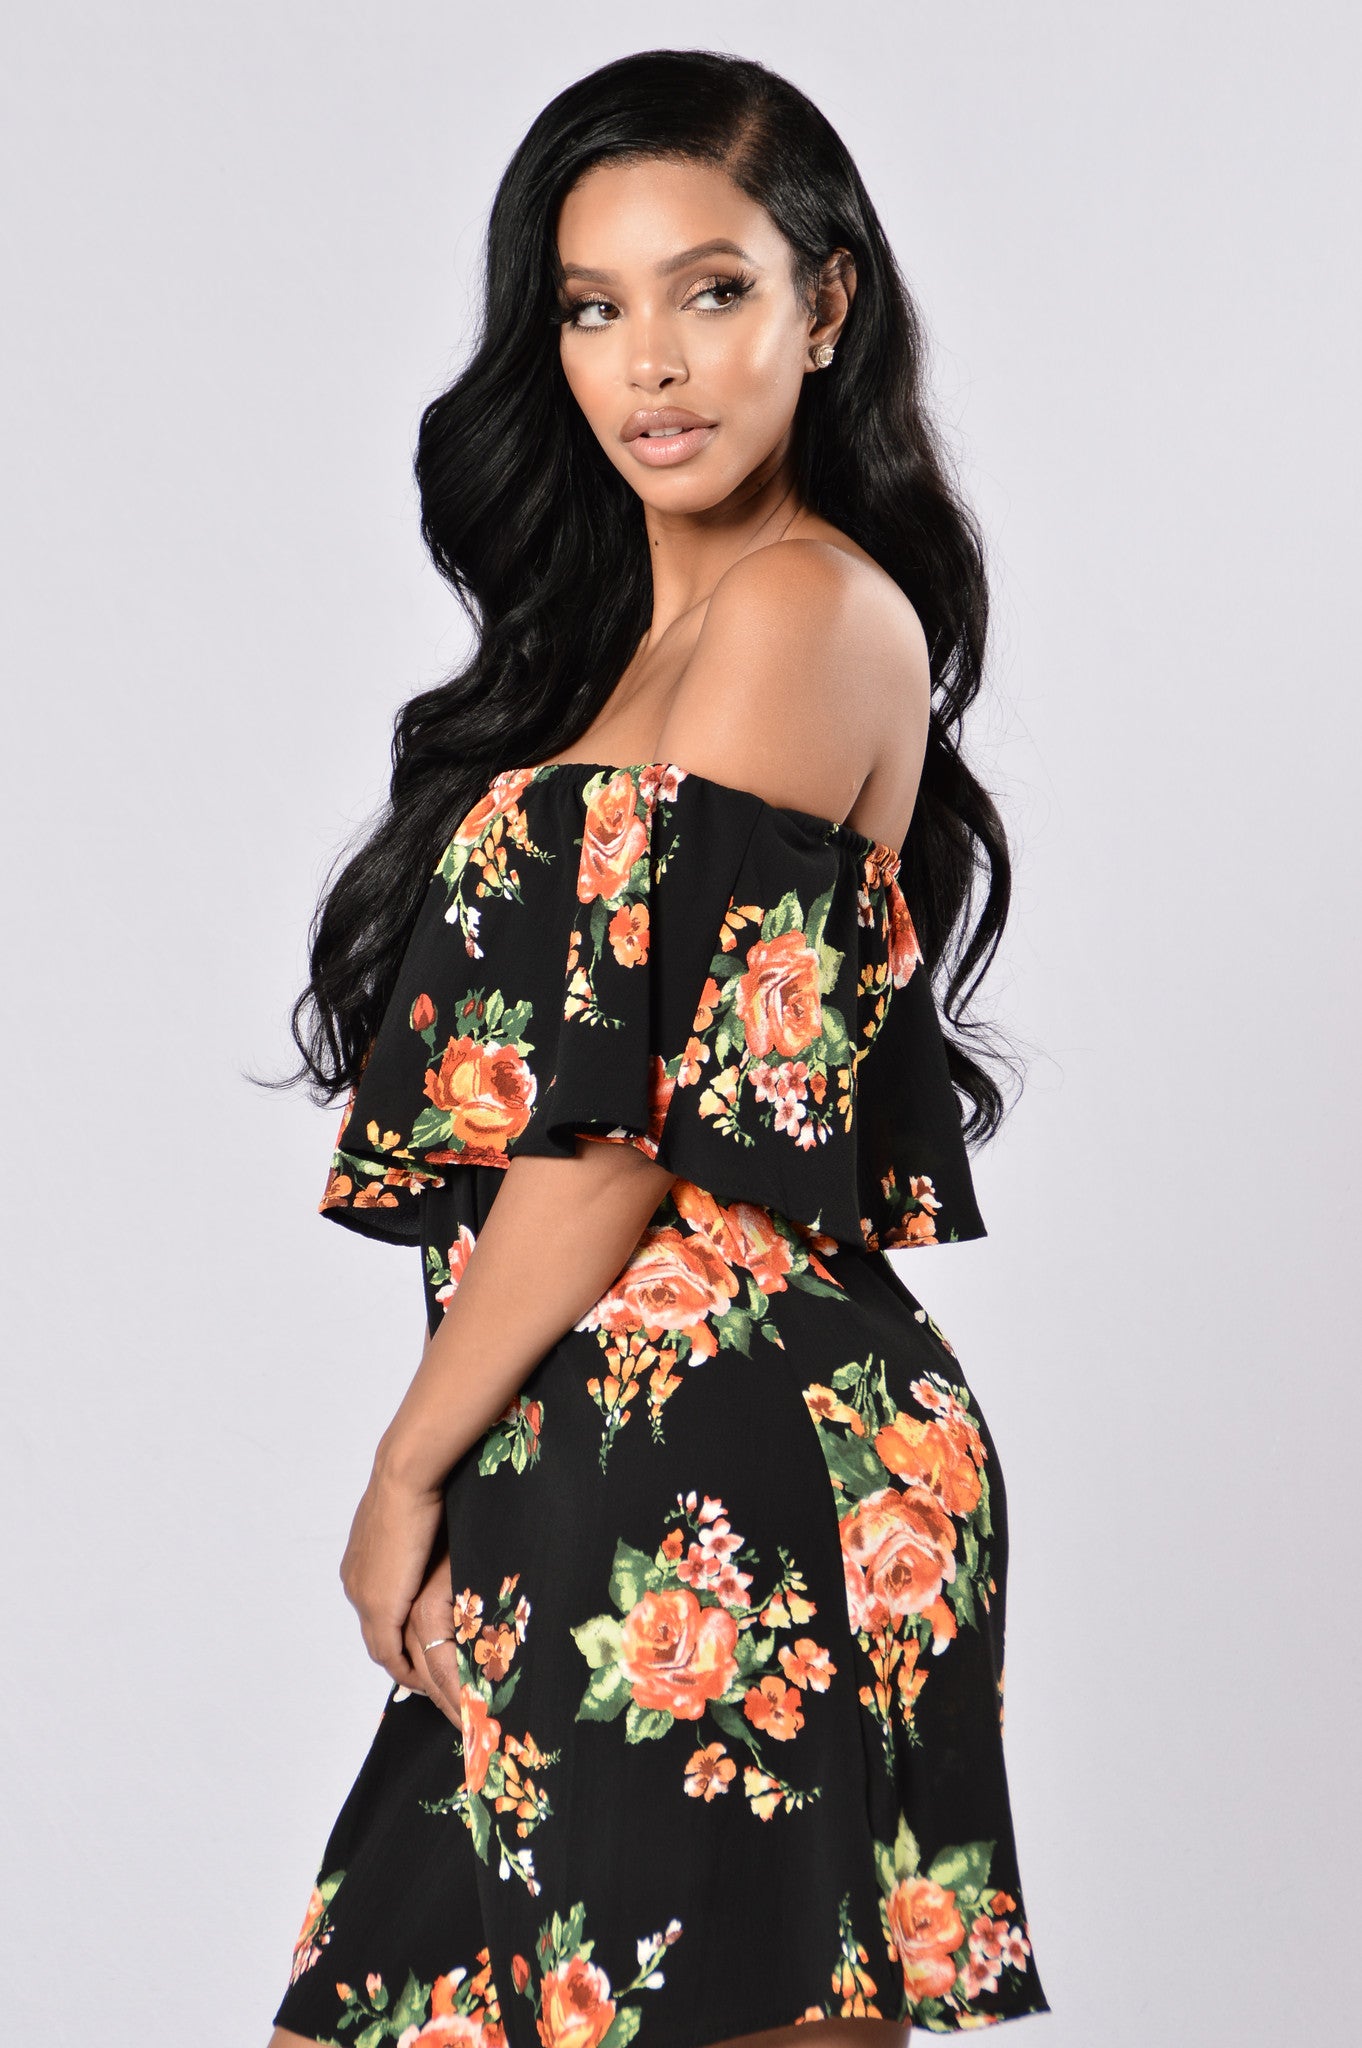 Give Love A Chance Dress - Black Floral